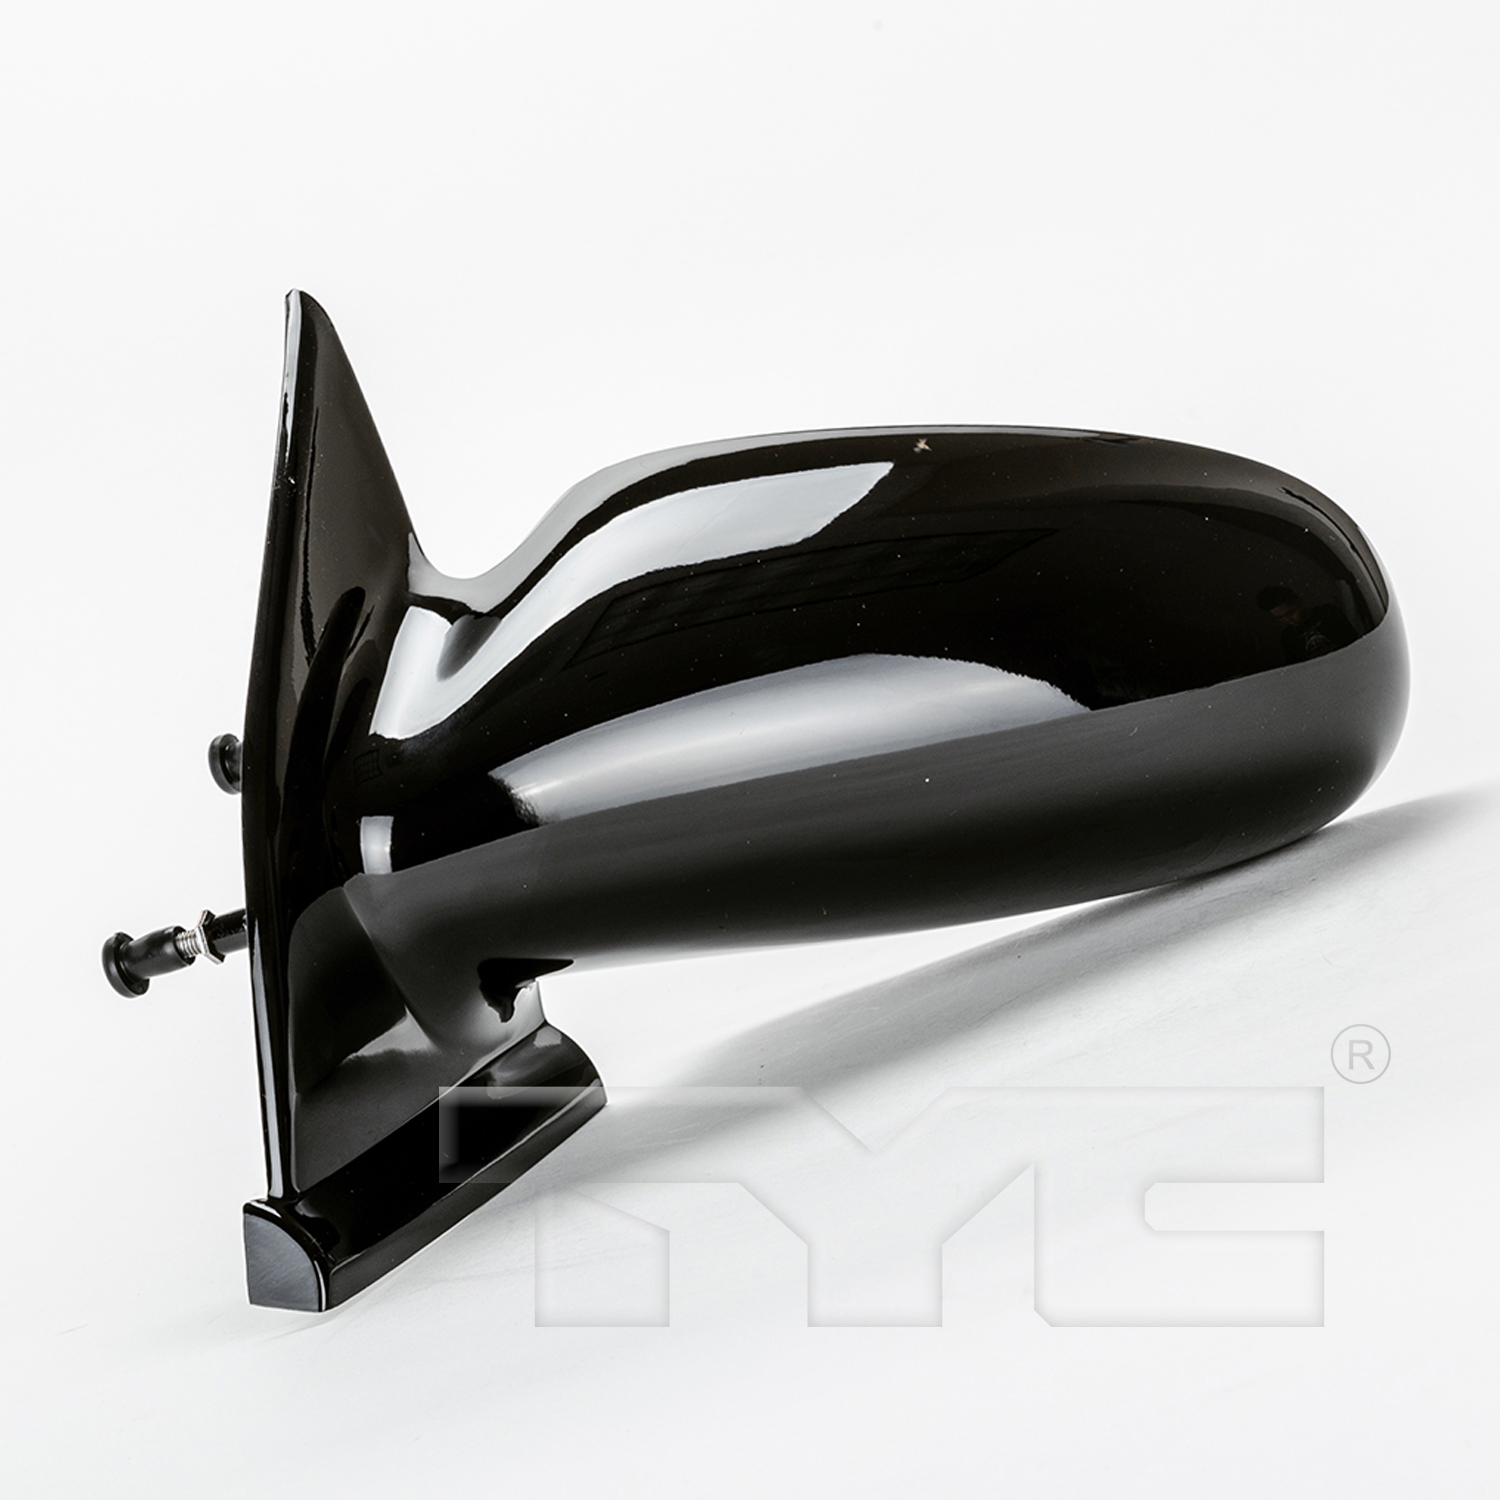 Aftermarket MIRRORS for SATURN - SL, SL,96-02,LT Mirror outside rear view